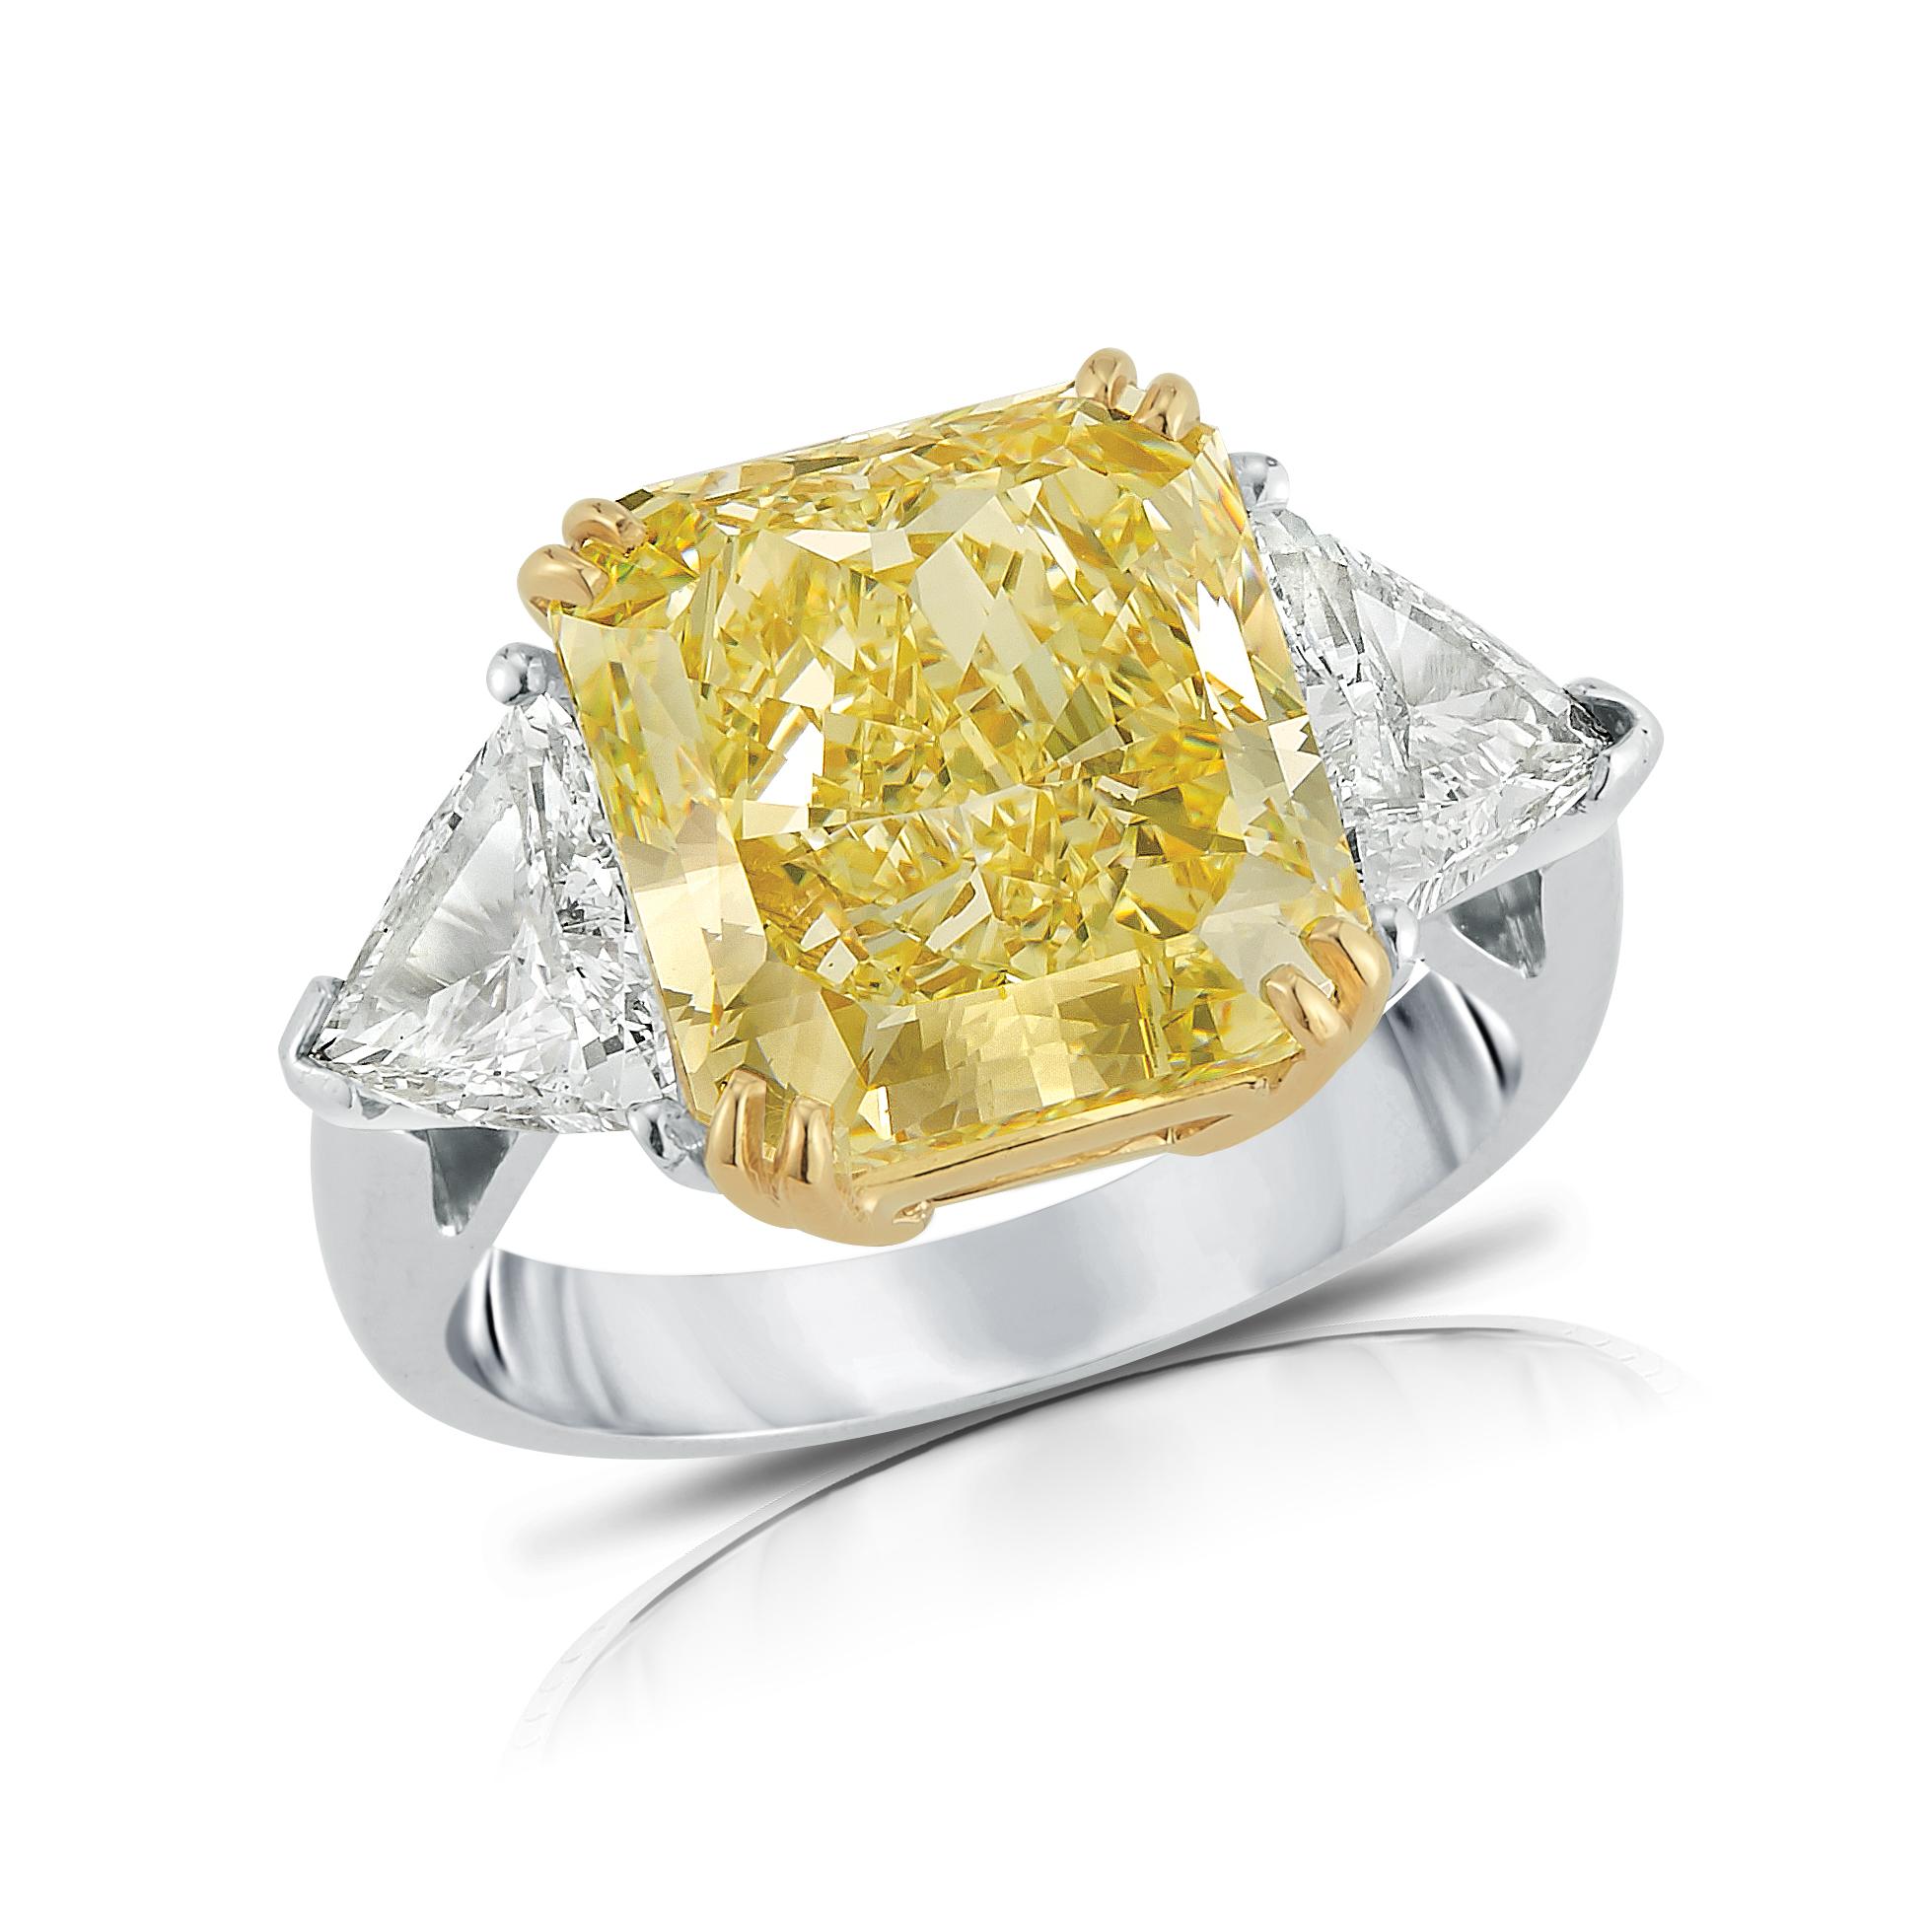 Magnificent Platinum & 18K Yellow Gold Engagement Ring, set in the center with Fancy Yellow 7.49C. VVS1 Cushion cut Diamond, GIA certified, flanked by two triangles Diamonds weight 1.38C. F color VS1 clarity. Total weight of the Diamonds is 8.87C.